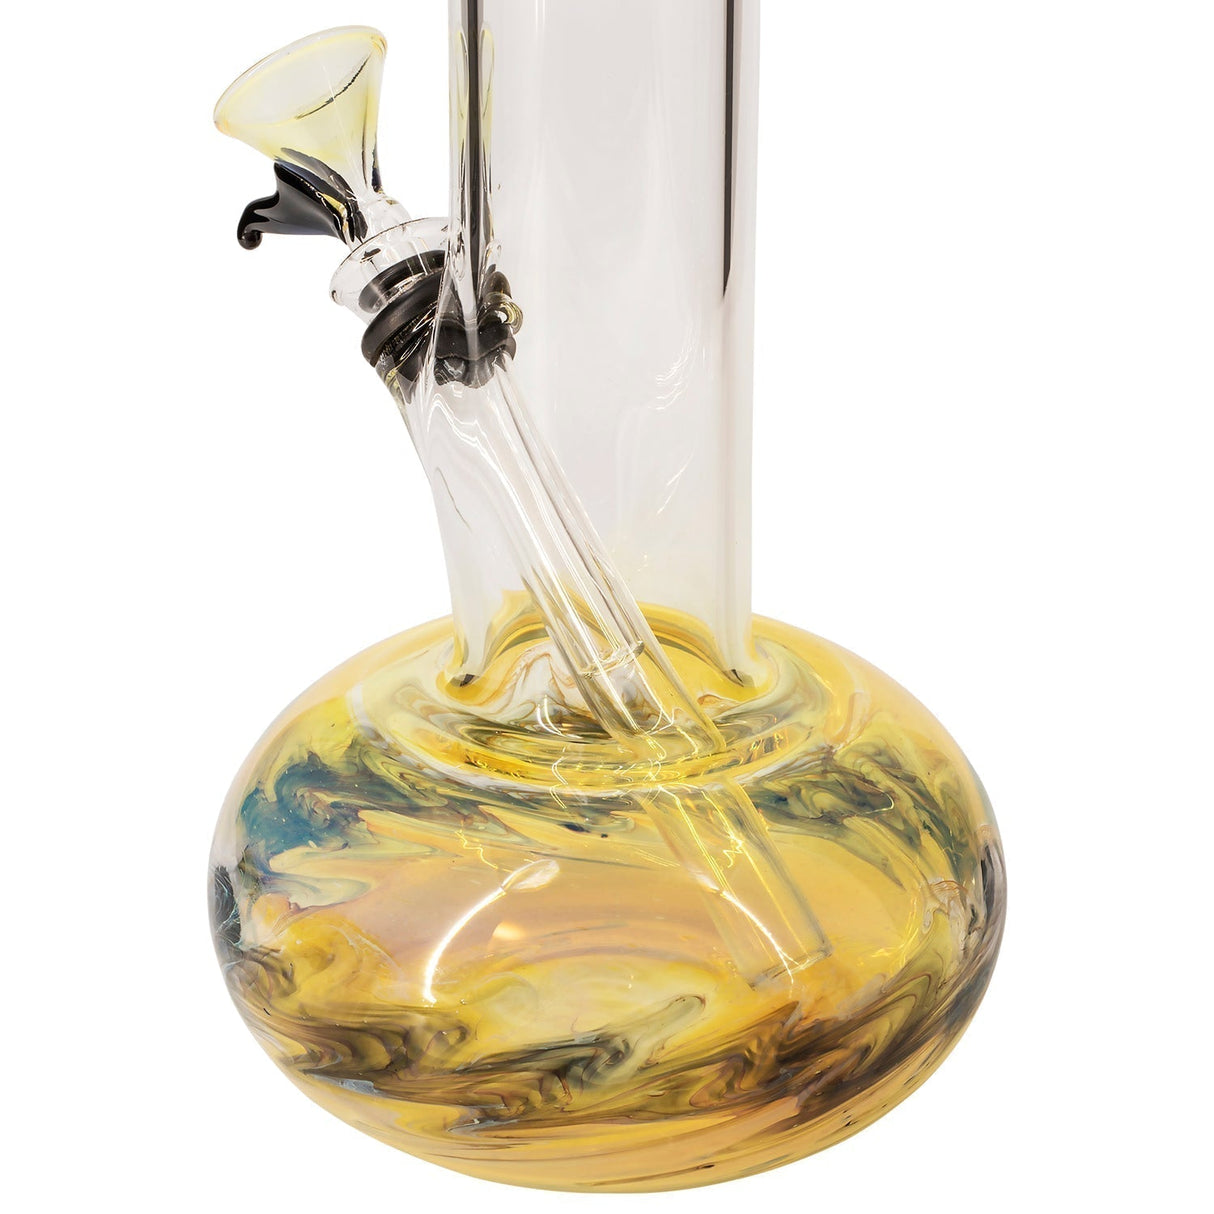 LA Pipes Raked Bubble Bong with Fumed Base, 11" Height, Borosilicate Glass, Close-up Side View